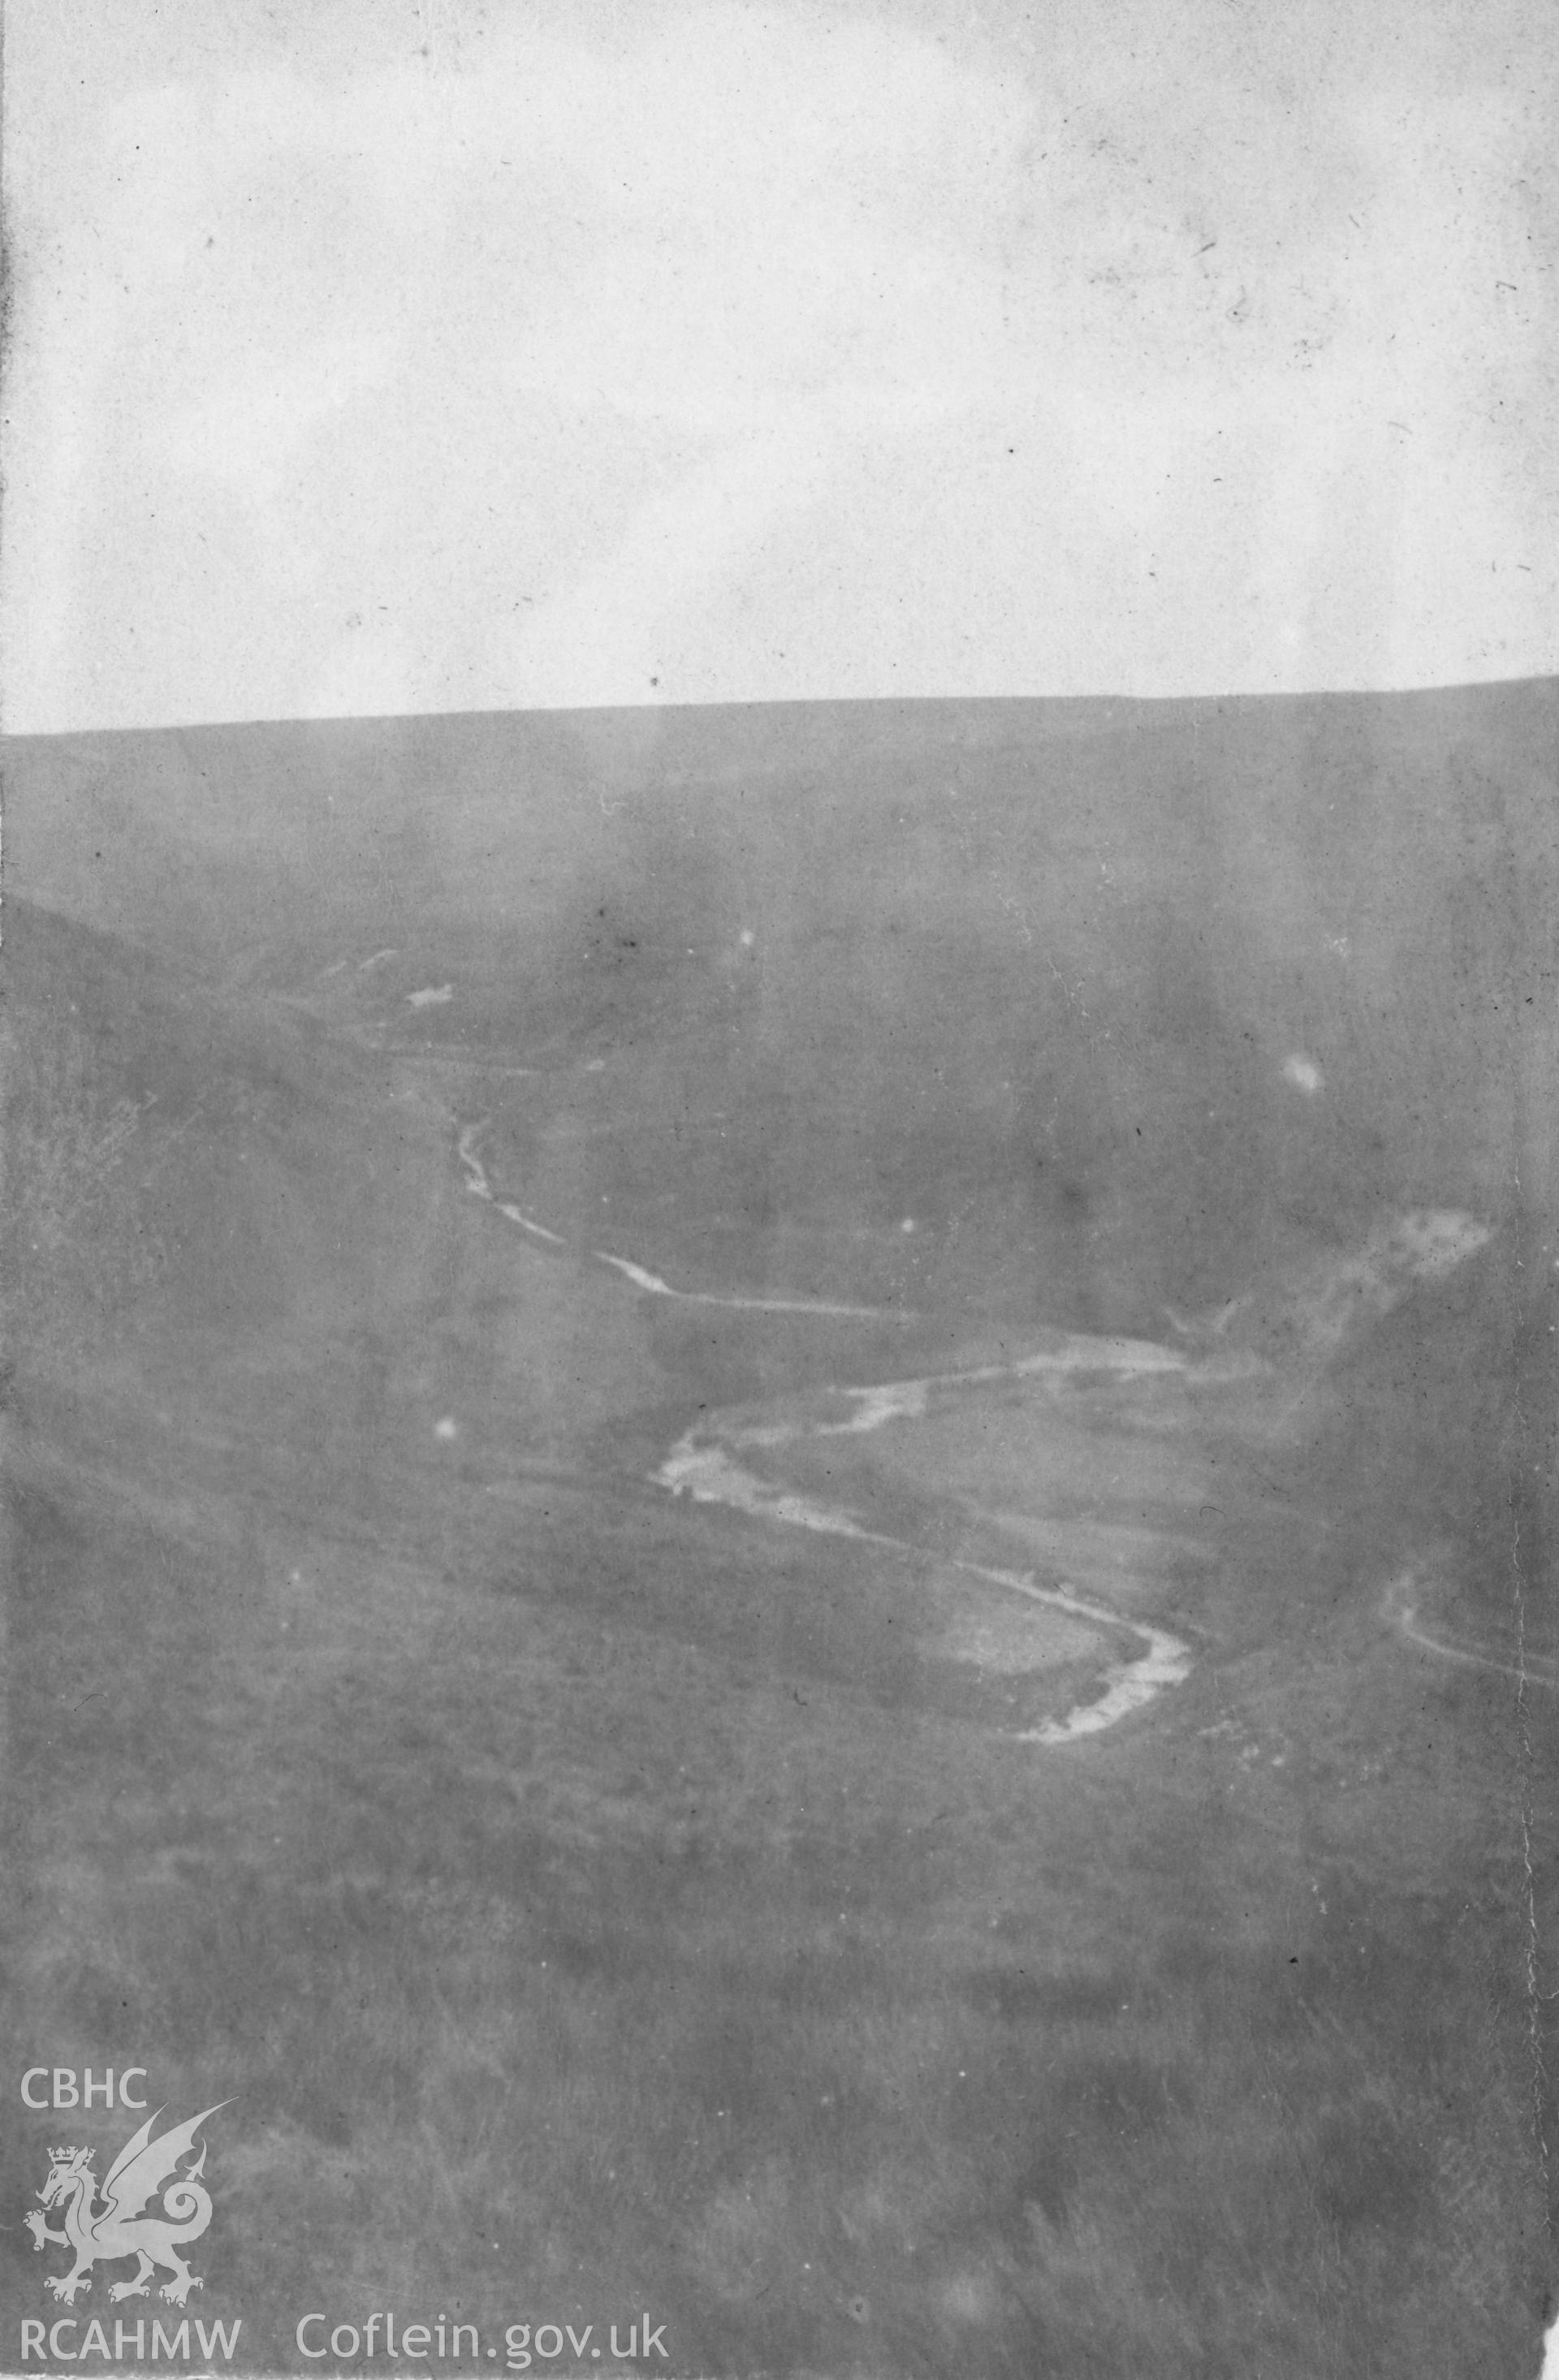 "River Towy 1 mile from source 1912". Landscape photo. Digitised from a photograph album showing views of Aberystwyth and District, produced by David John Saer, school teacher of Aberystwyth. Loaned for copying by Dr Alan Chamberlain.